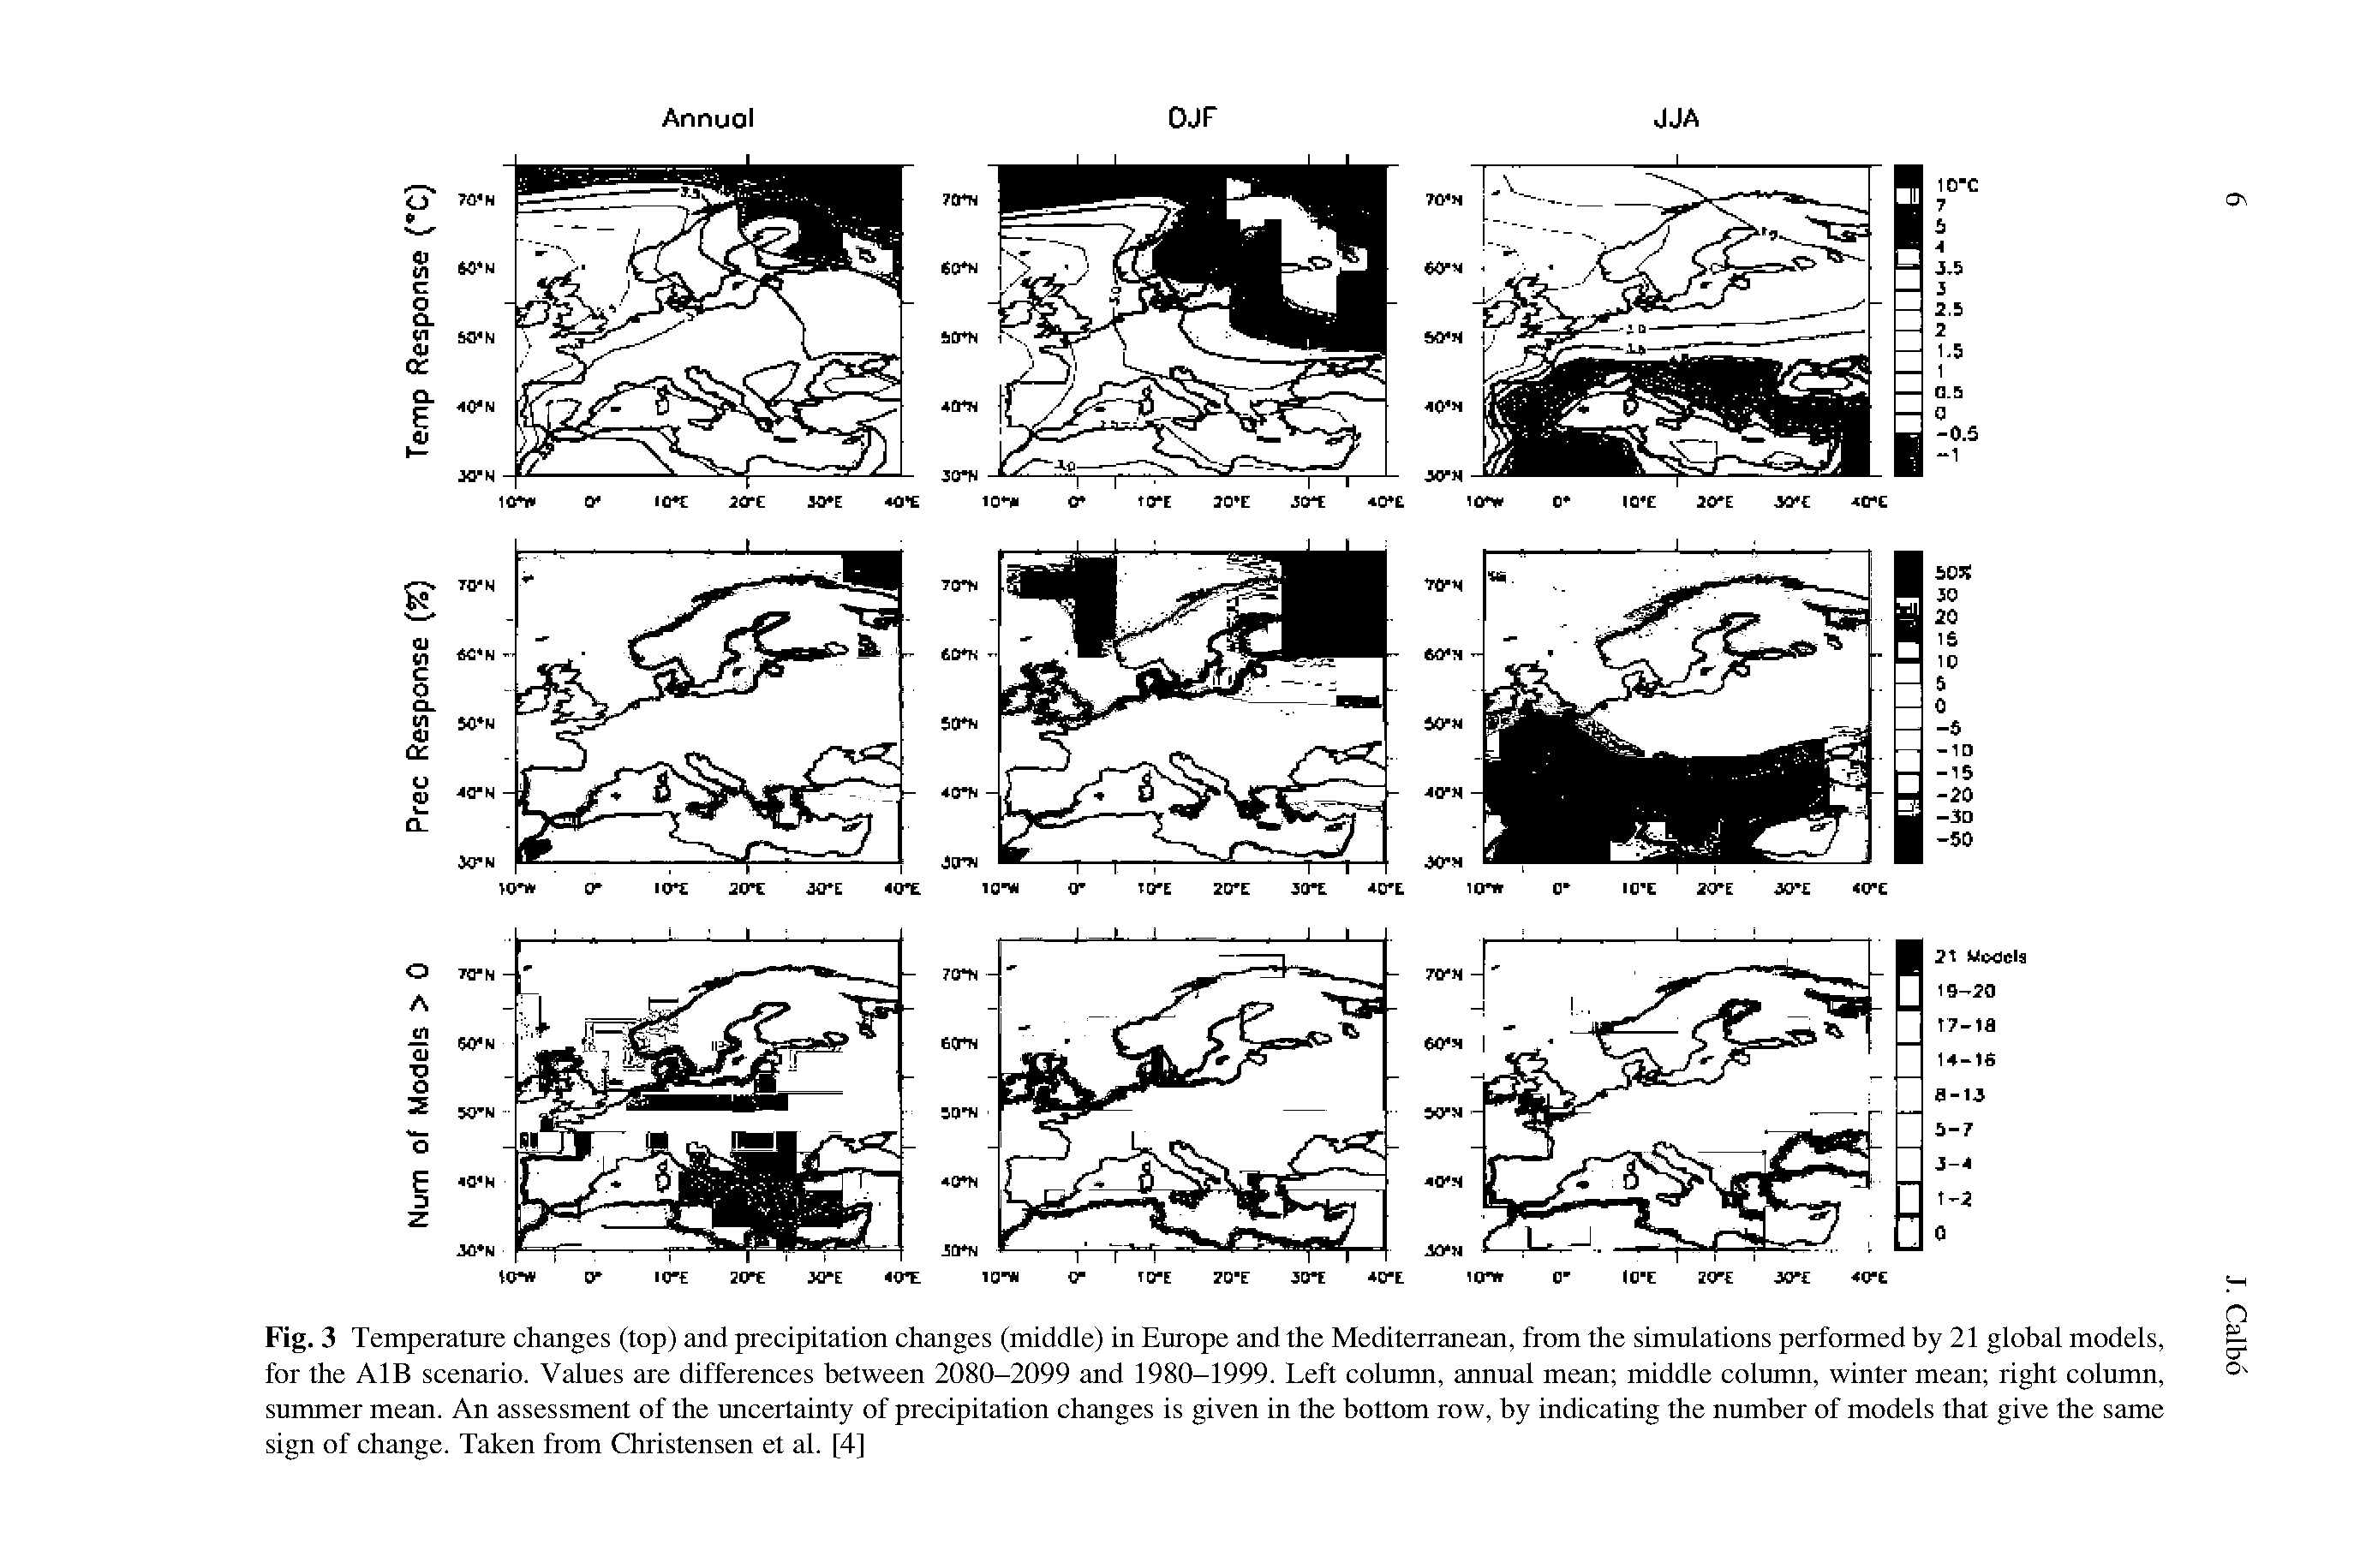 Fig. 3 Temperature changes (top) and precipitation changes (middle) in Europe and the Mediterranean, from the simulations performed by 21 global models, for the AIB scenario. Values are differences between 2080-2099 and 1980-1999. Left column, annual mean middle column, winter mean right column, summer mean. An assessment of the uncertainty of precipitation changes is given in the bottom row, by indicating the number of models that give the same sign of change. Taken from Christensen et al. [4]...